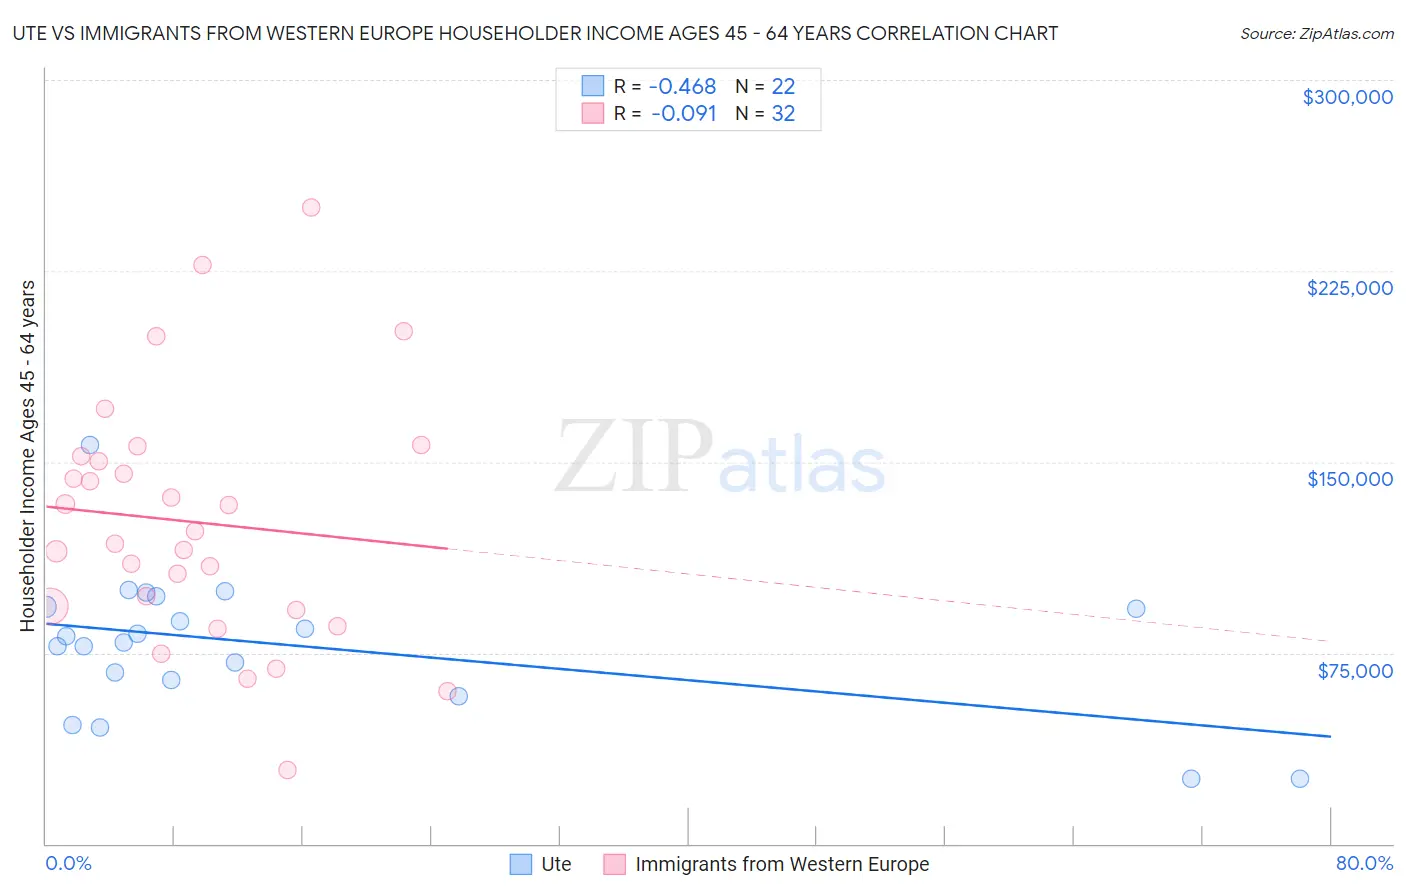 Ute vs Immigrants from Western Europe Householder Income Ages 45 - 64 years